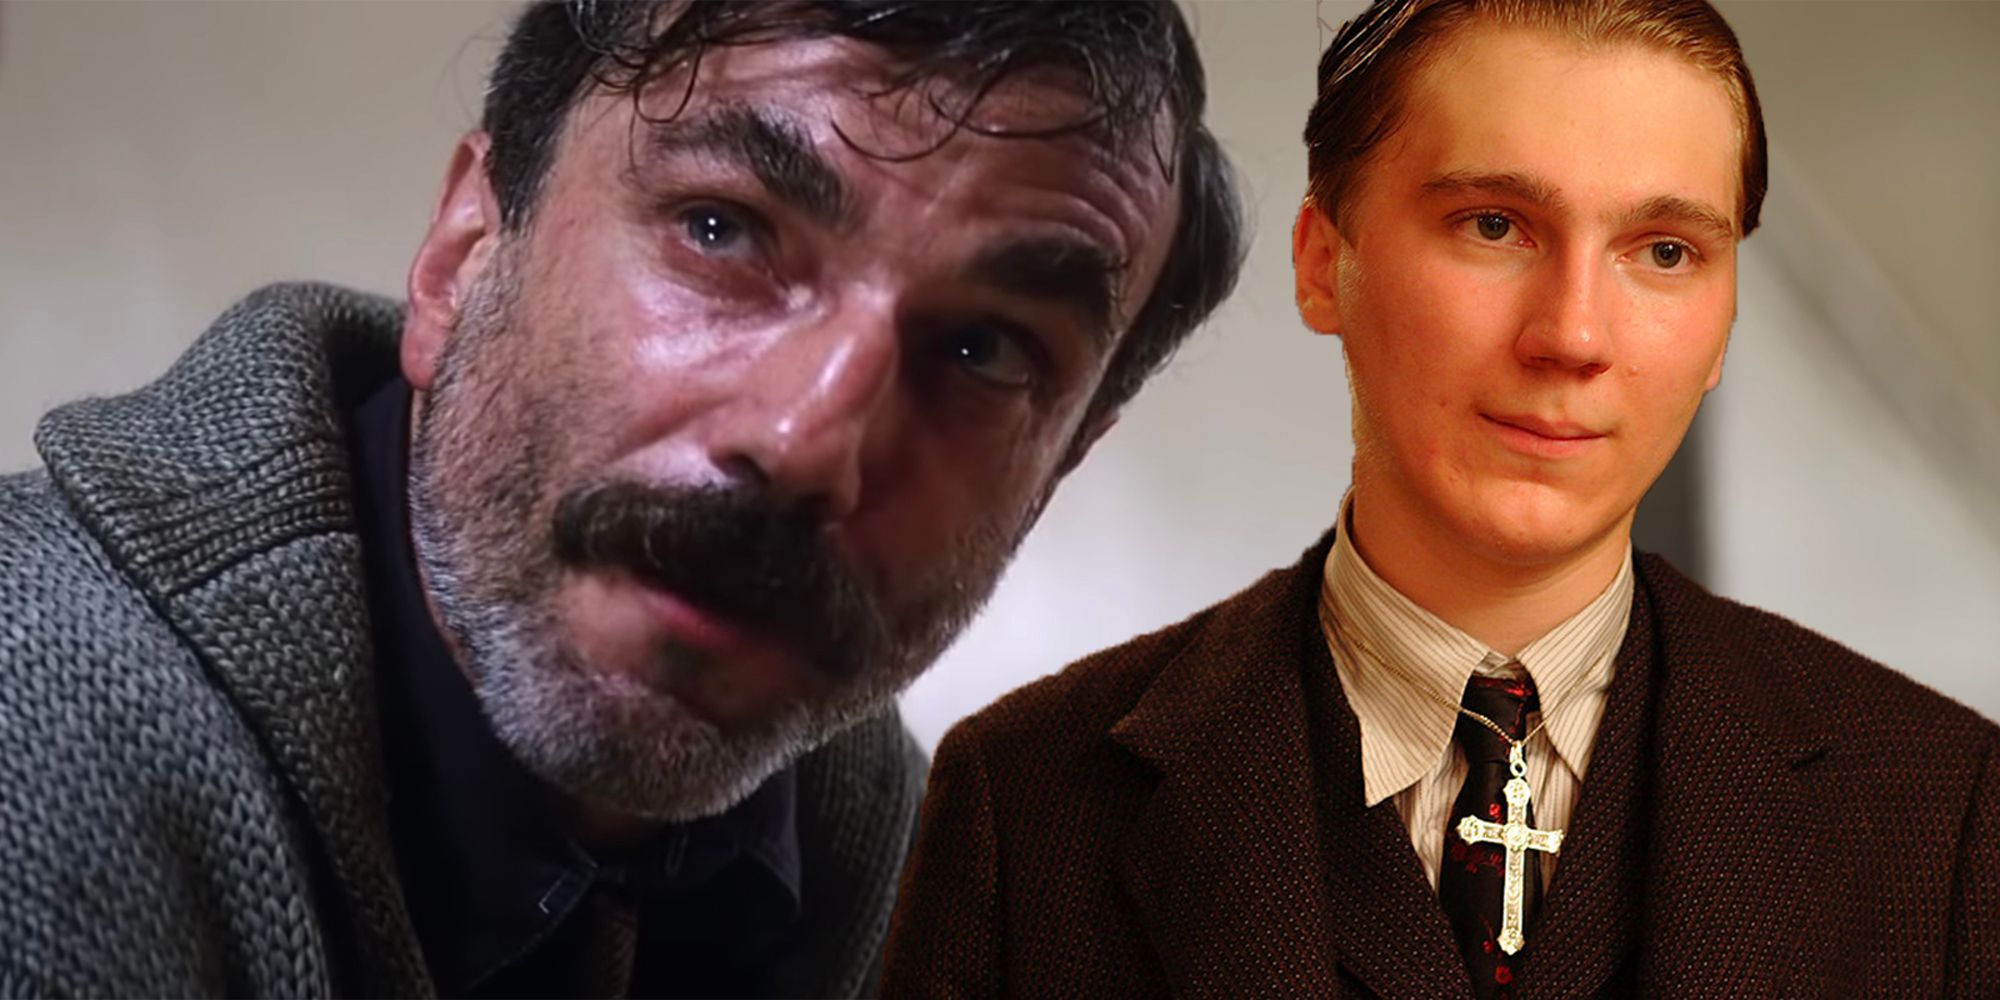 There Will Be Blood Daniel Day-Lewis Plainview Paul Dano Eli